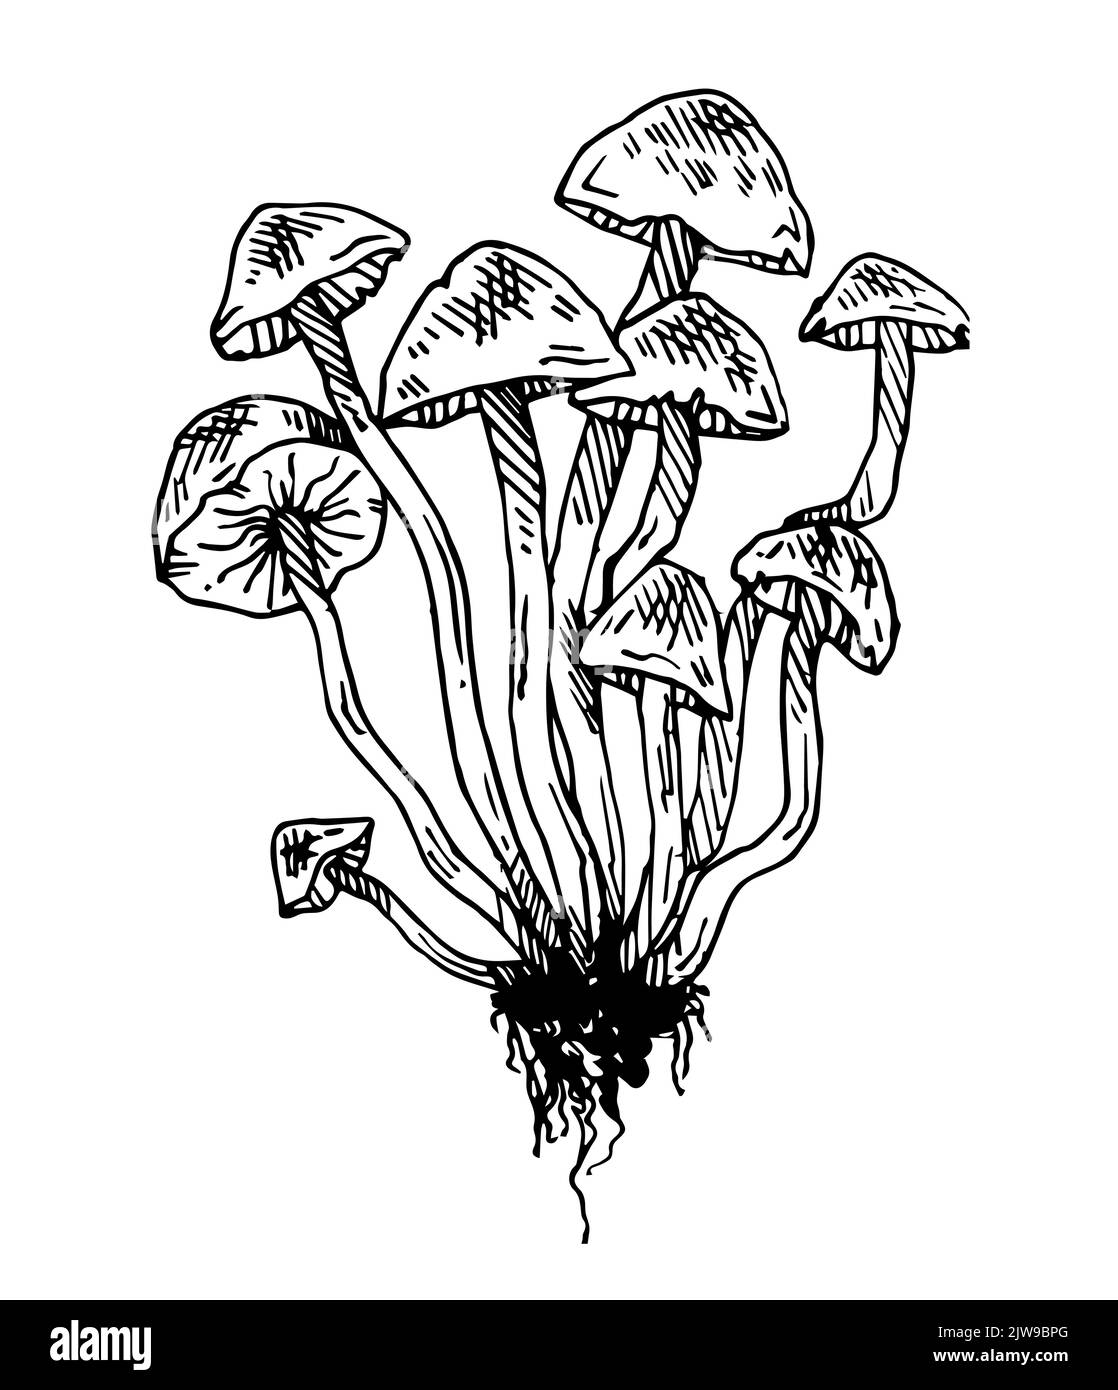 Bunch of mushrooms. Edible and non-edible mushroom plants from wild forest. Outline hand drawn sketch. Drawing with ink. Isolated on white background Stock Vector